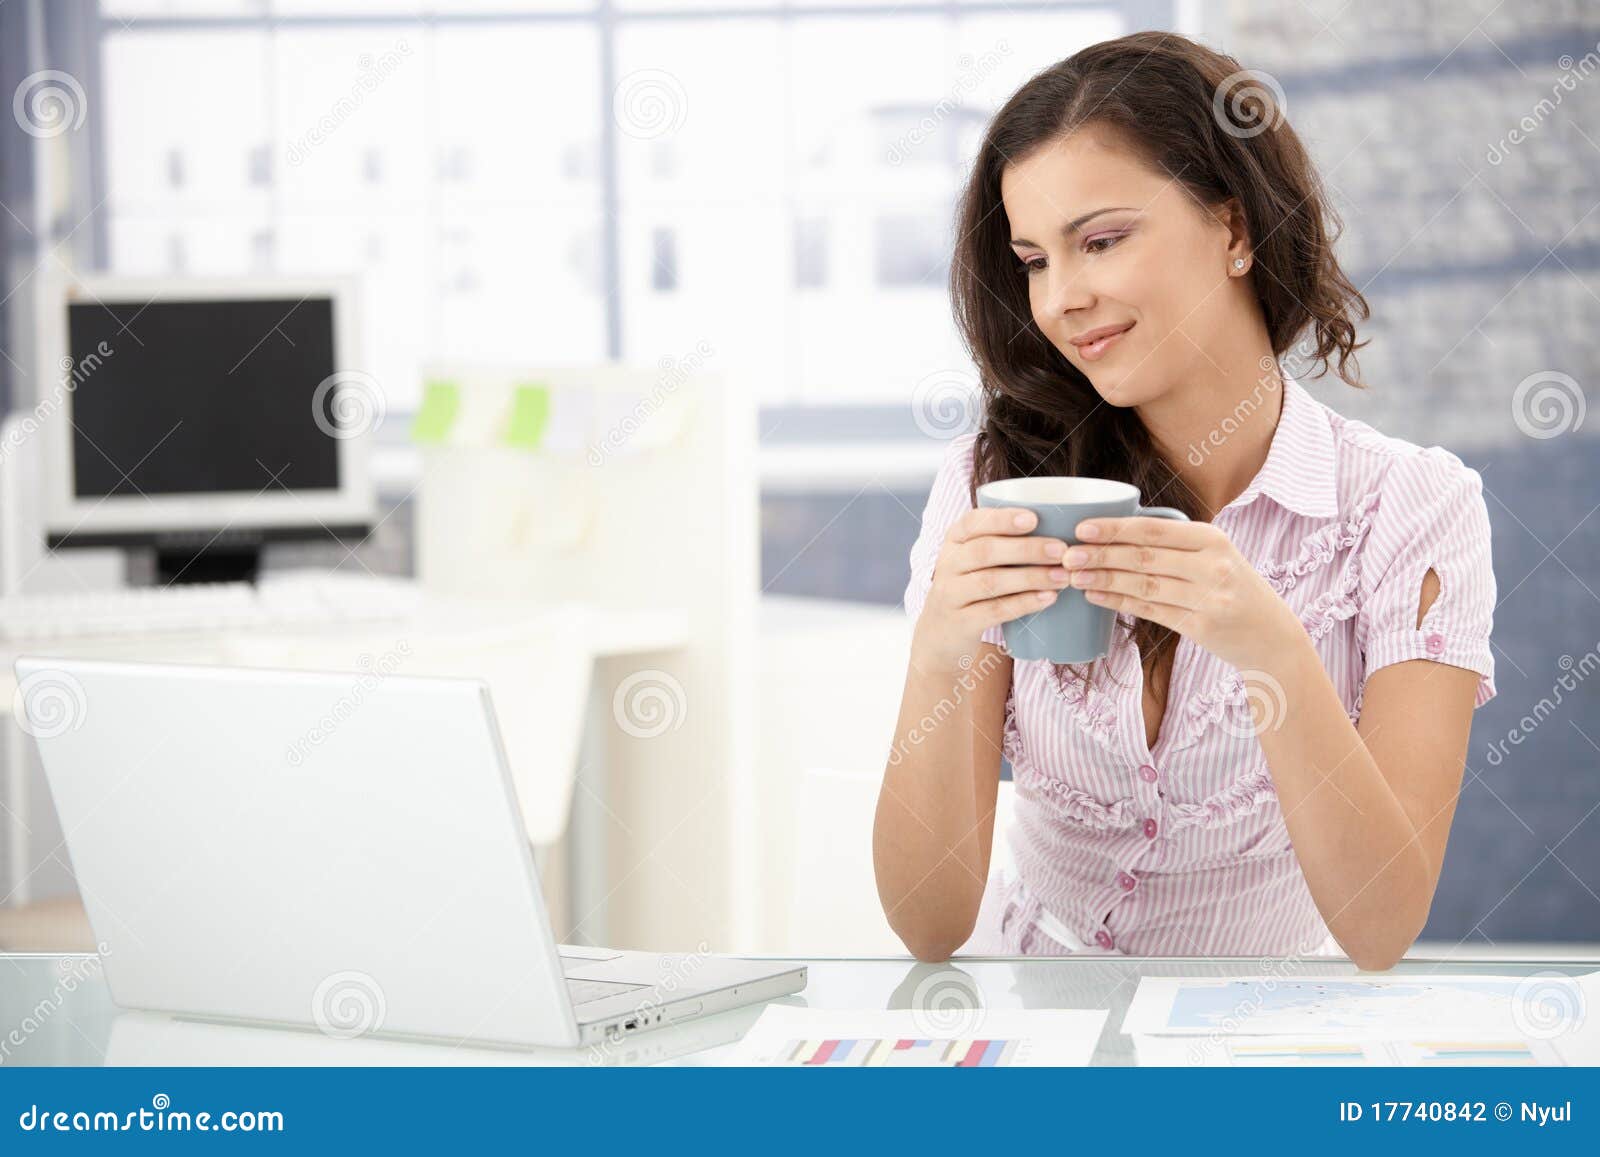 attractive woman browsing internet in office